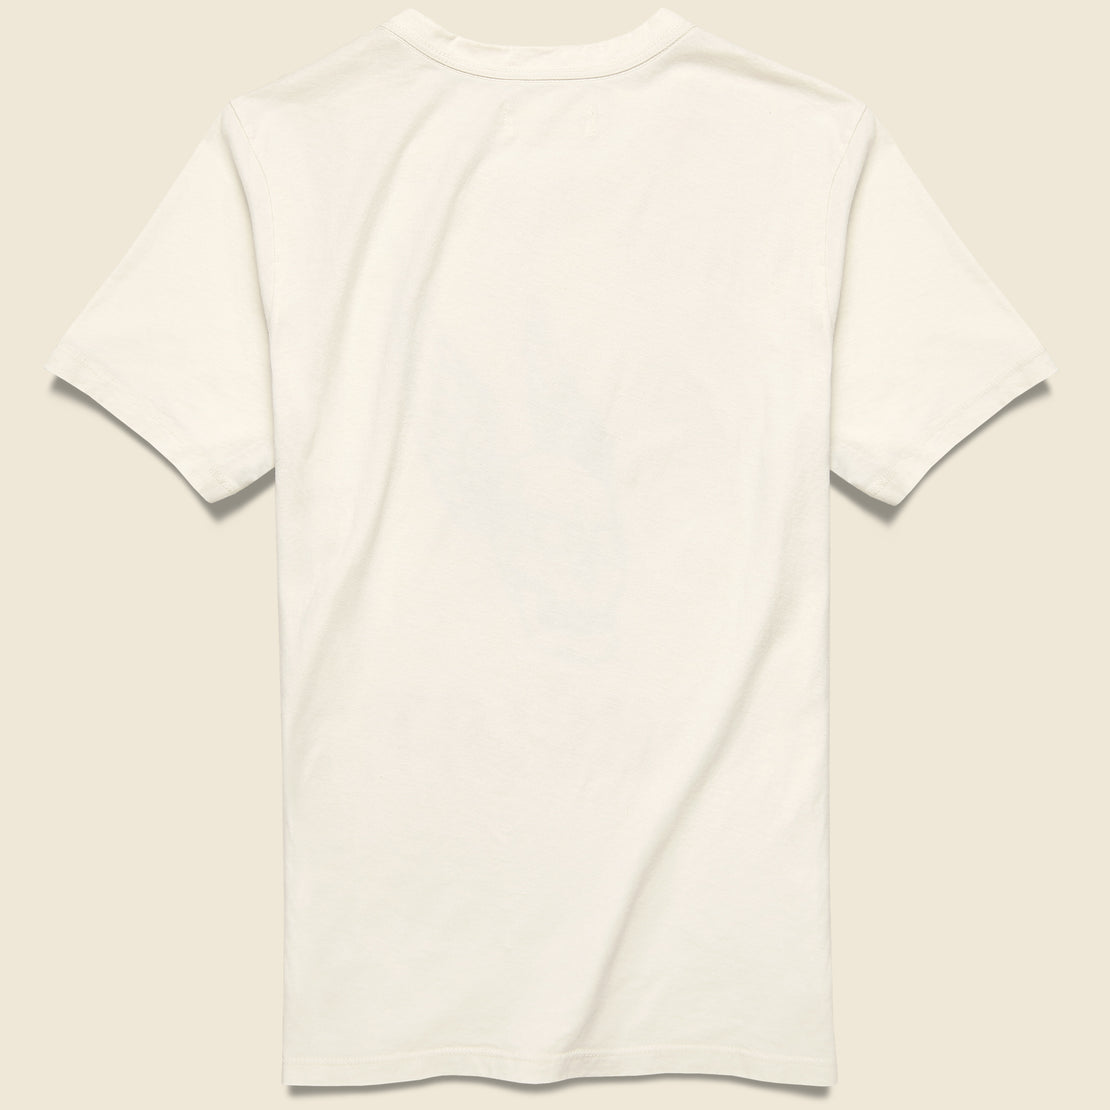 Triumph Tee - White - Imogene + Willie - STAG Provisions - Tops - S/S Tee - Graphic